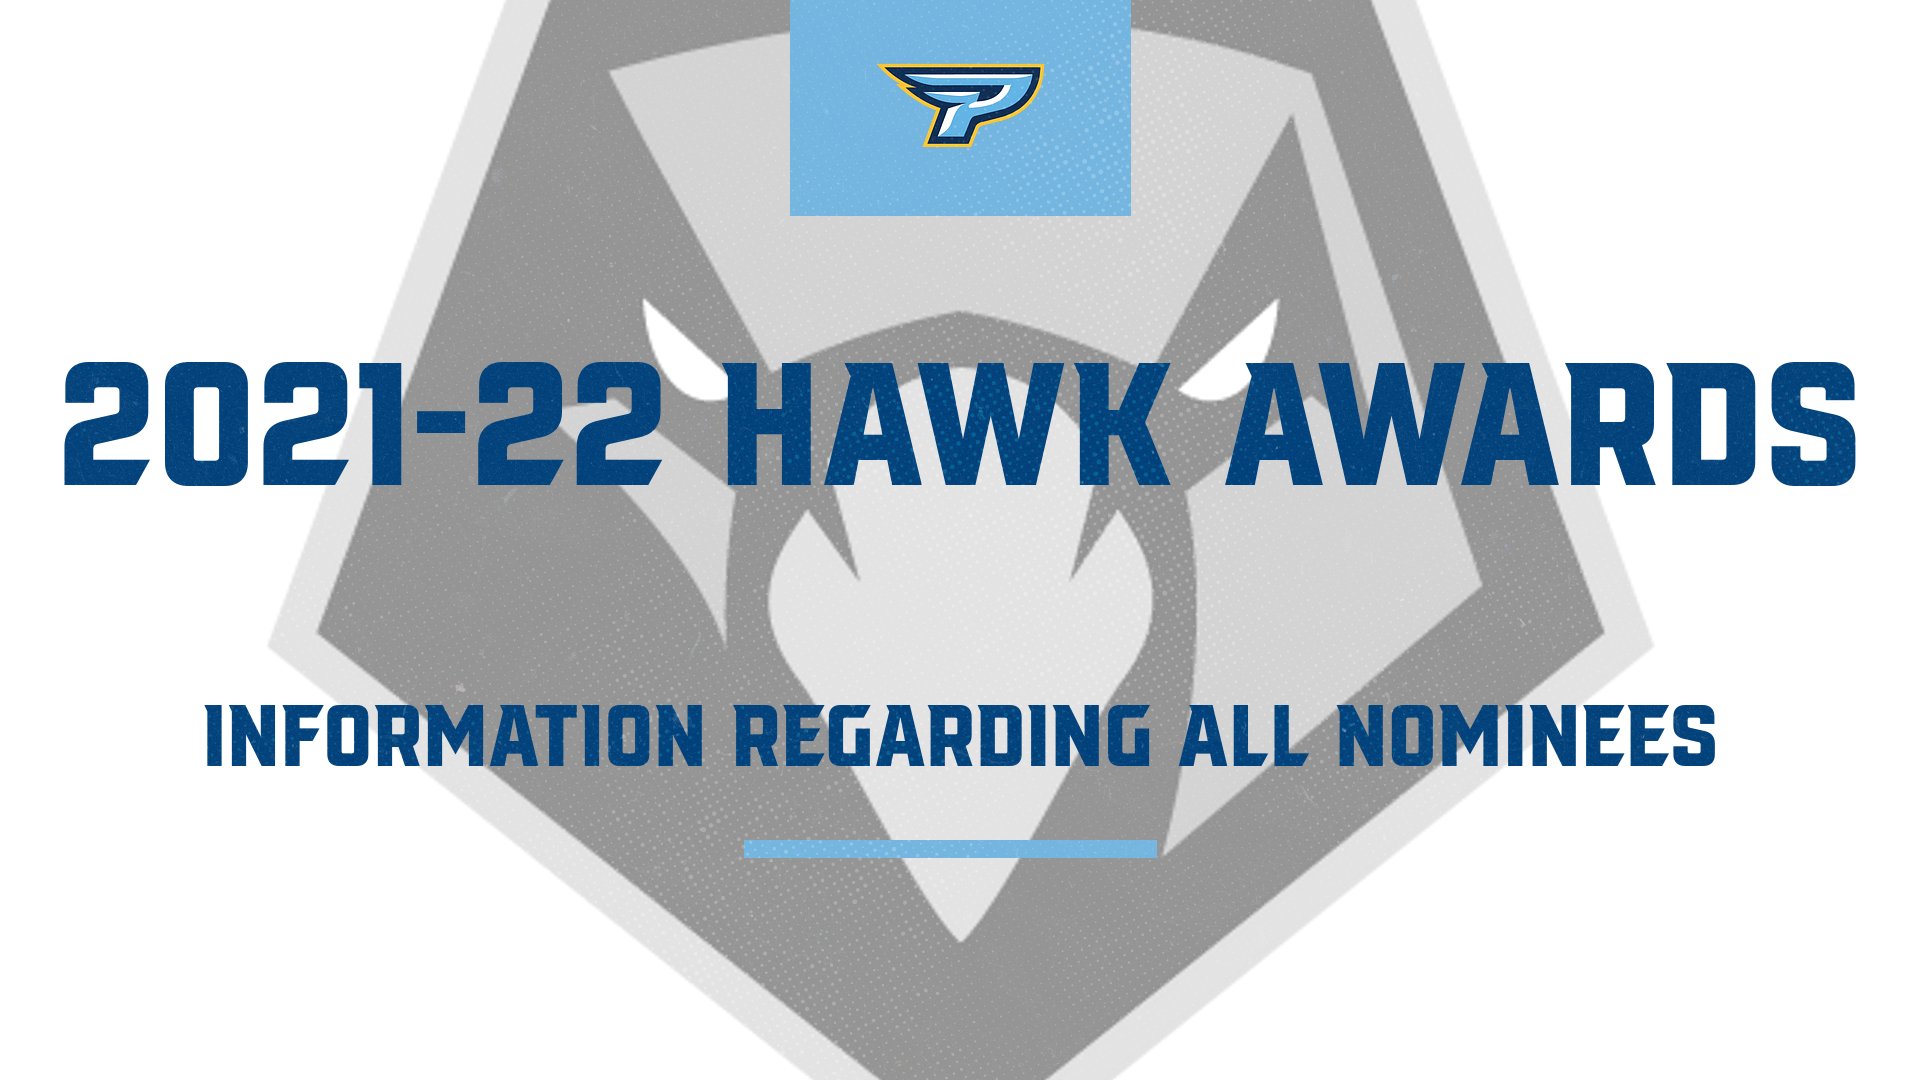 Nominees announced for 2021-22 Hawk Awards